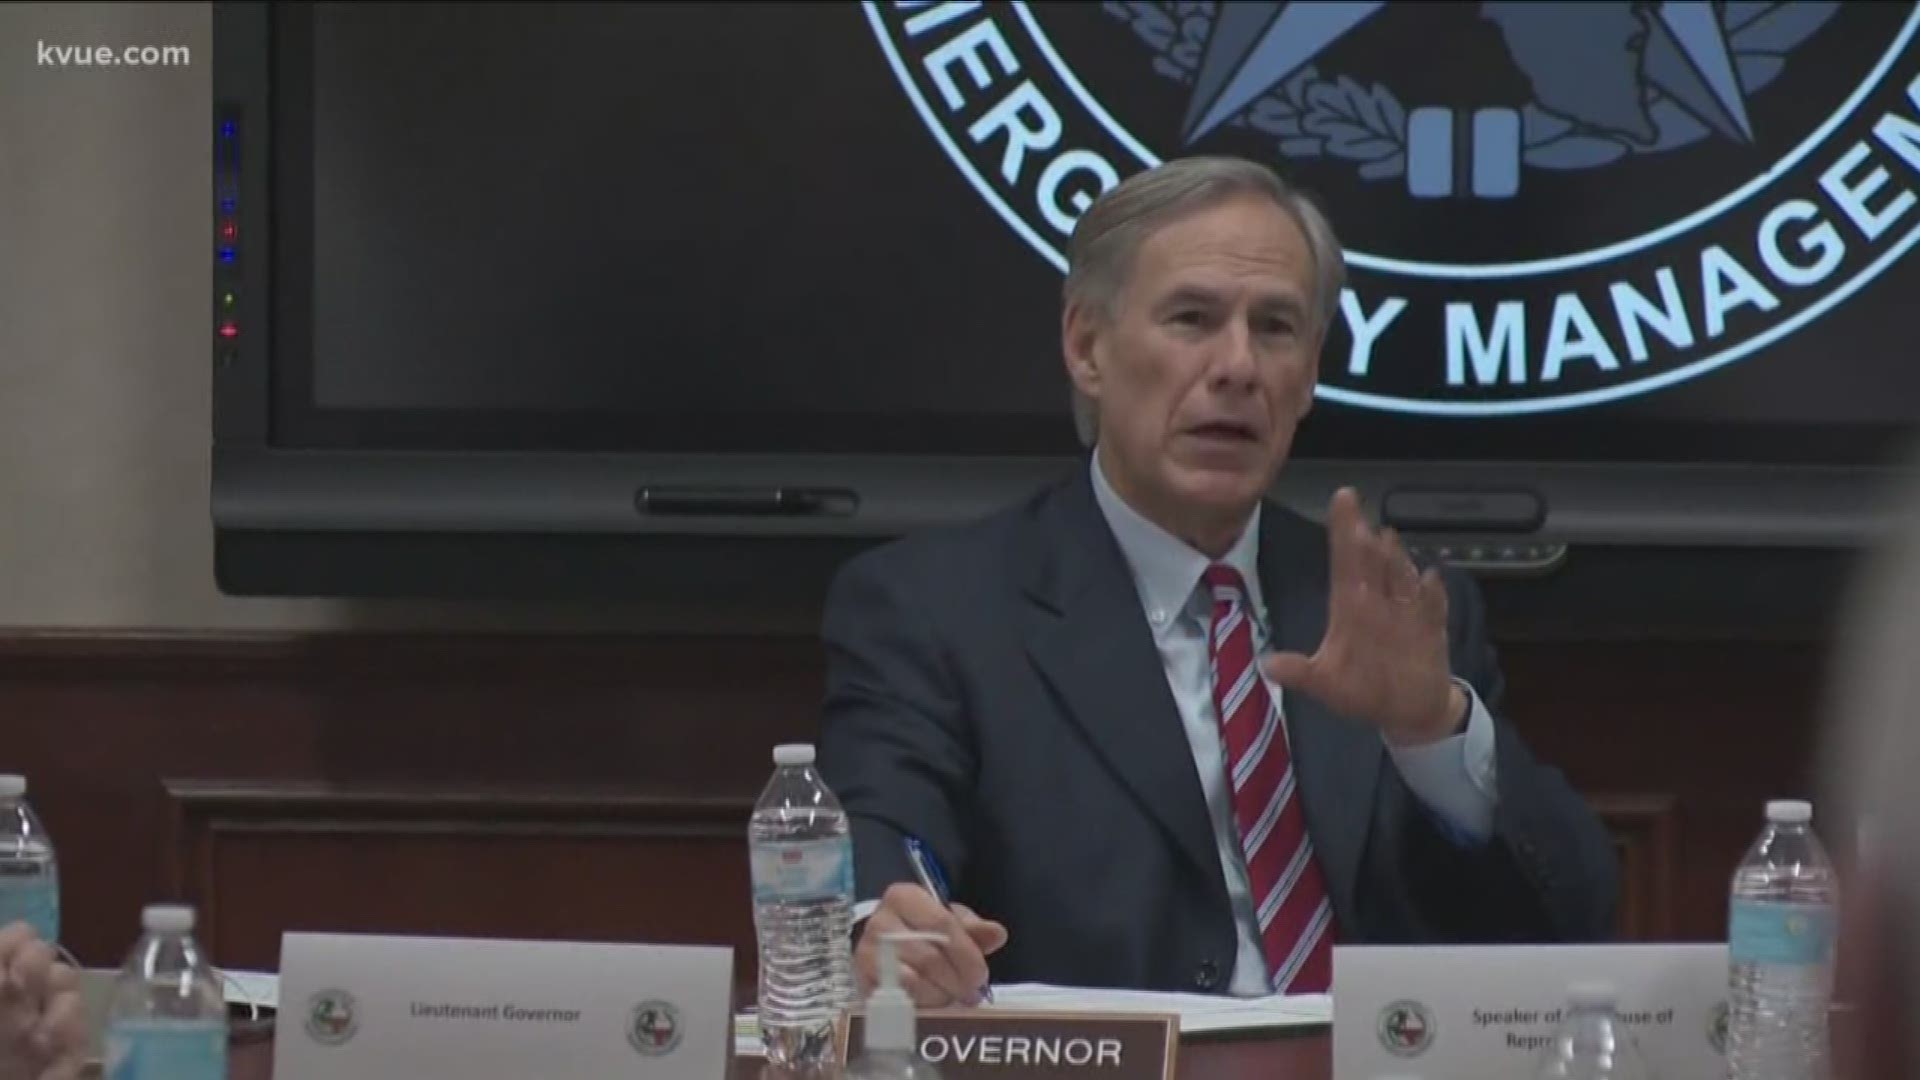 Texas Gov. Greg Abbott spoke Thursday about how the state is handling and preparing for the coronavirus if it were to come to Texas.